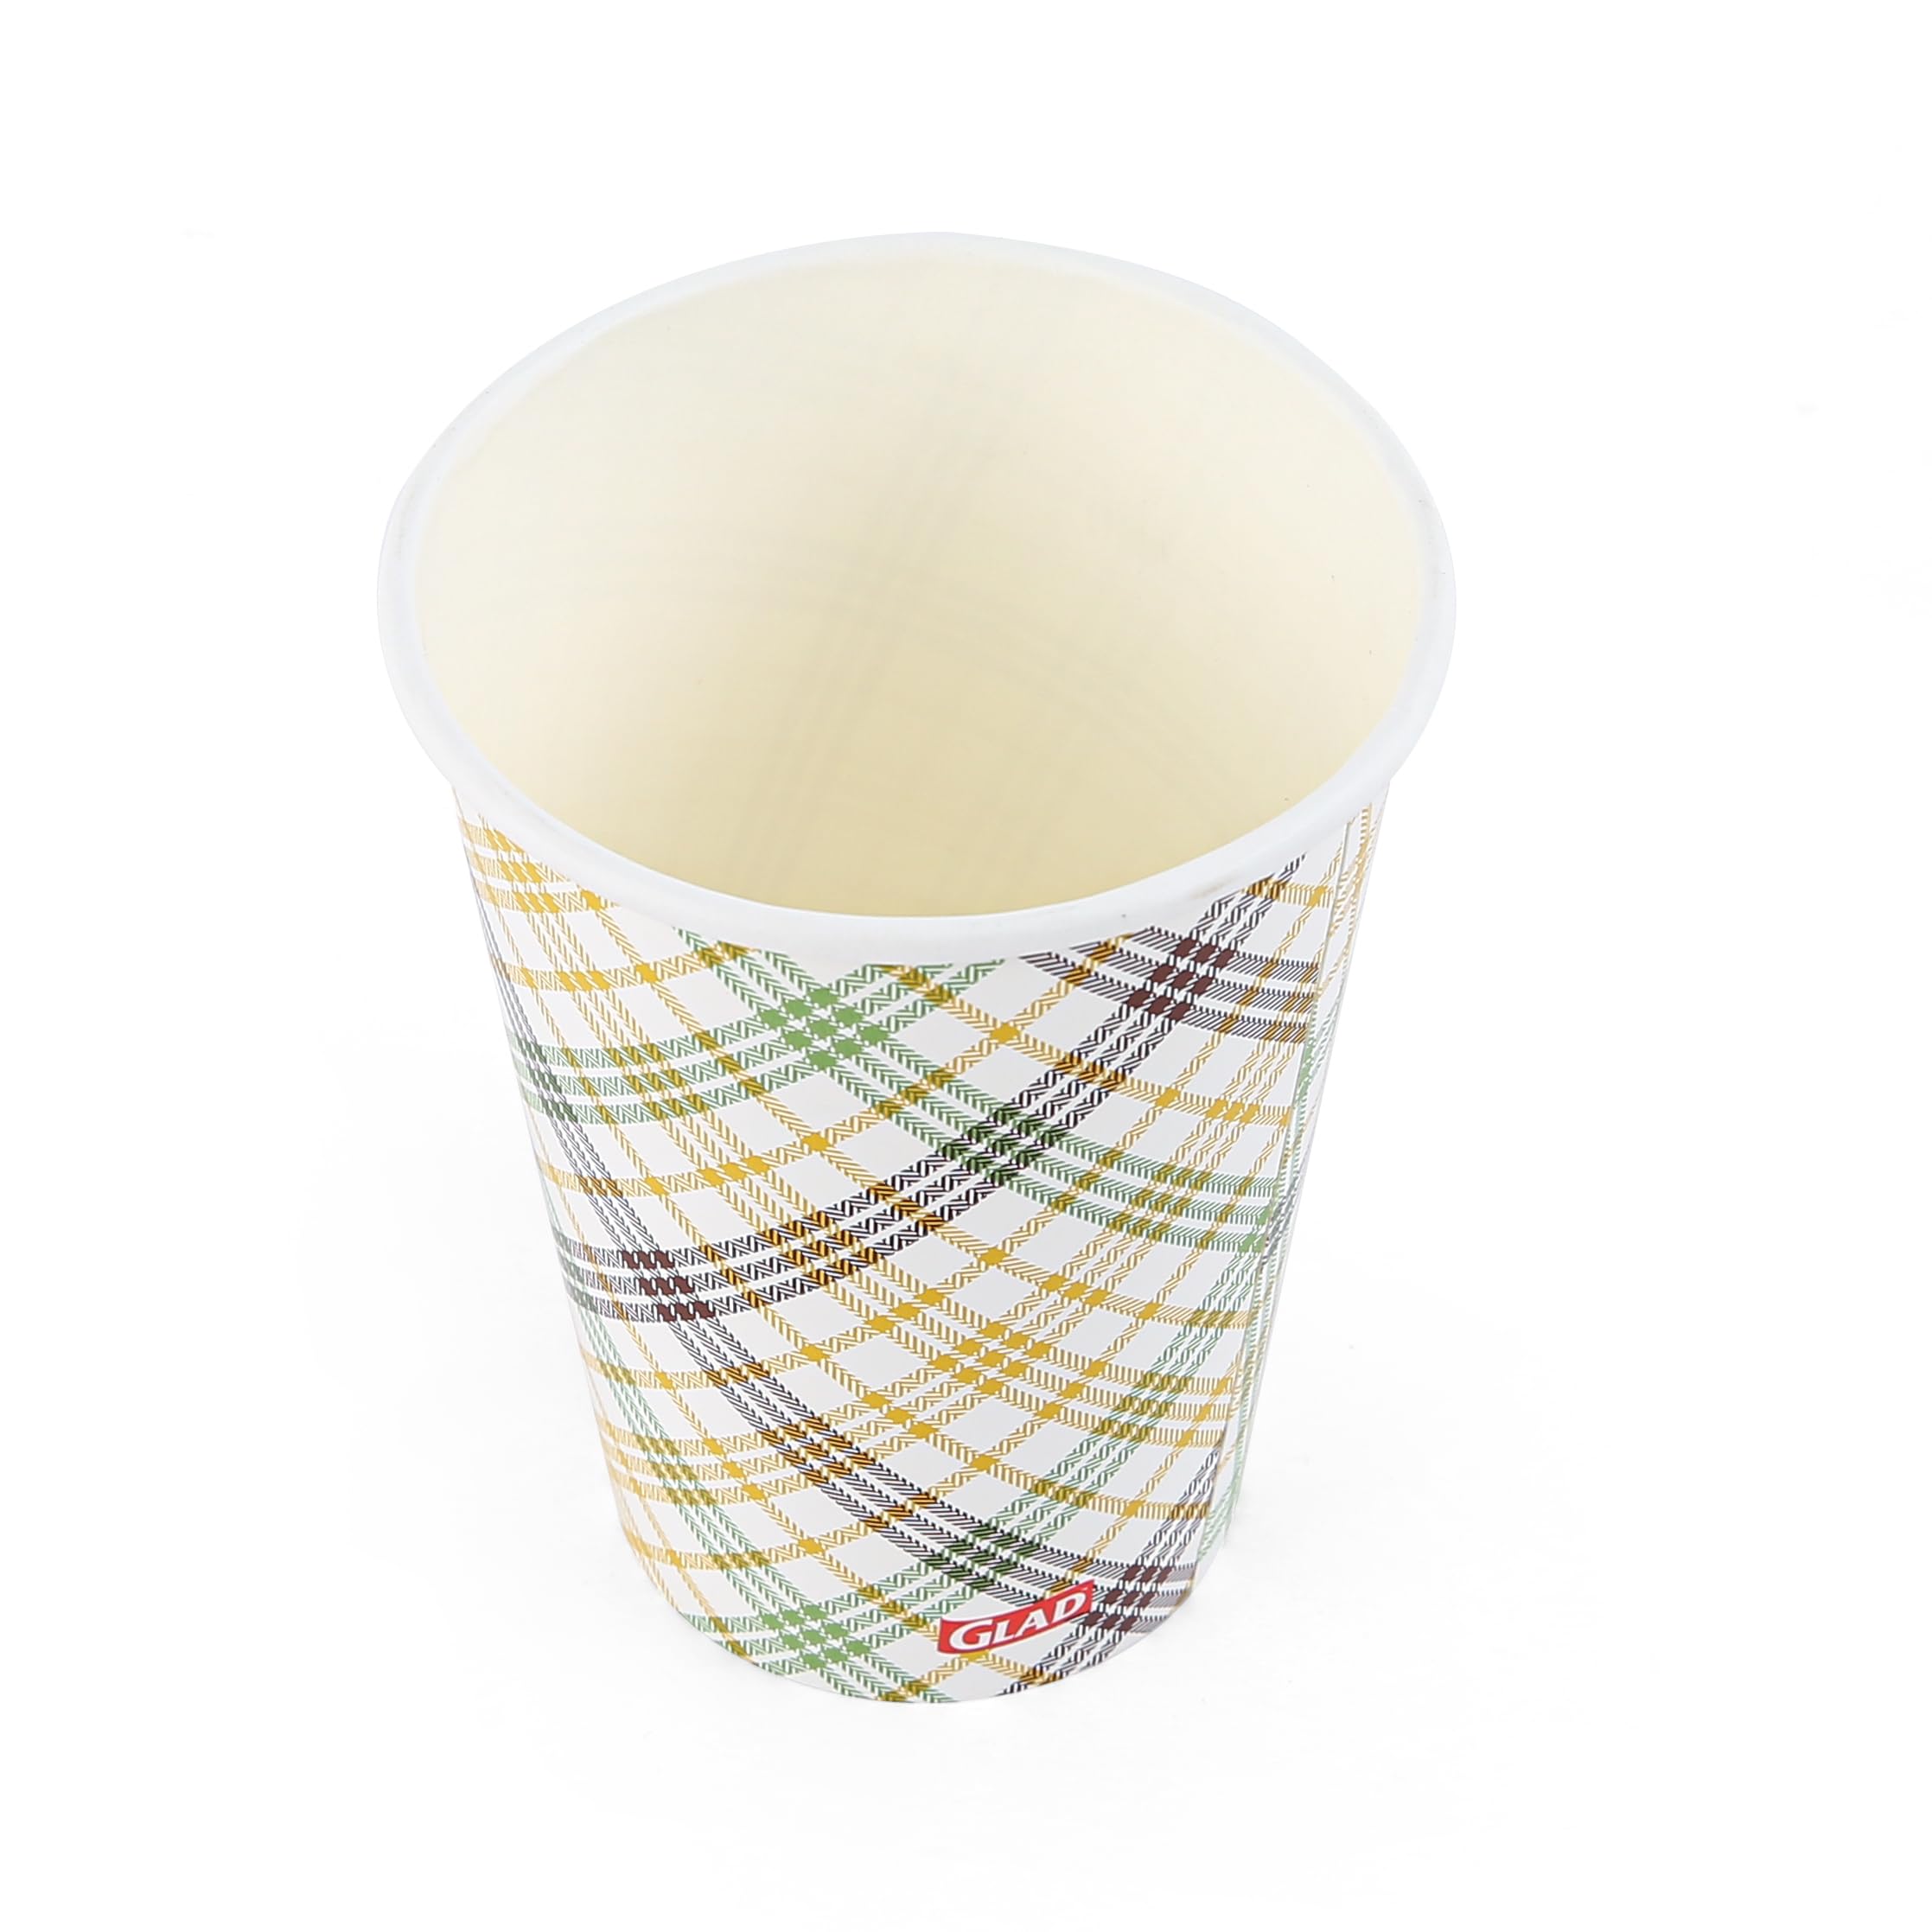 Glad Everyday Disposable Paper Cups with Harvest Weave Design | Heavy Duty Paper Cups, Drinking Paper Cups for All Beverages and Everyday Use | 12 Ounces, 20 Count